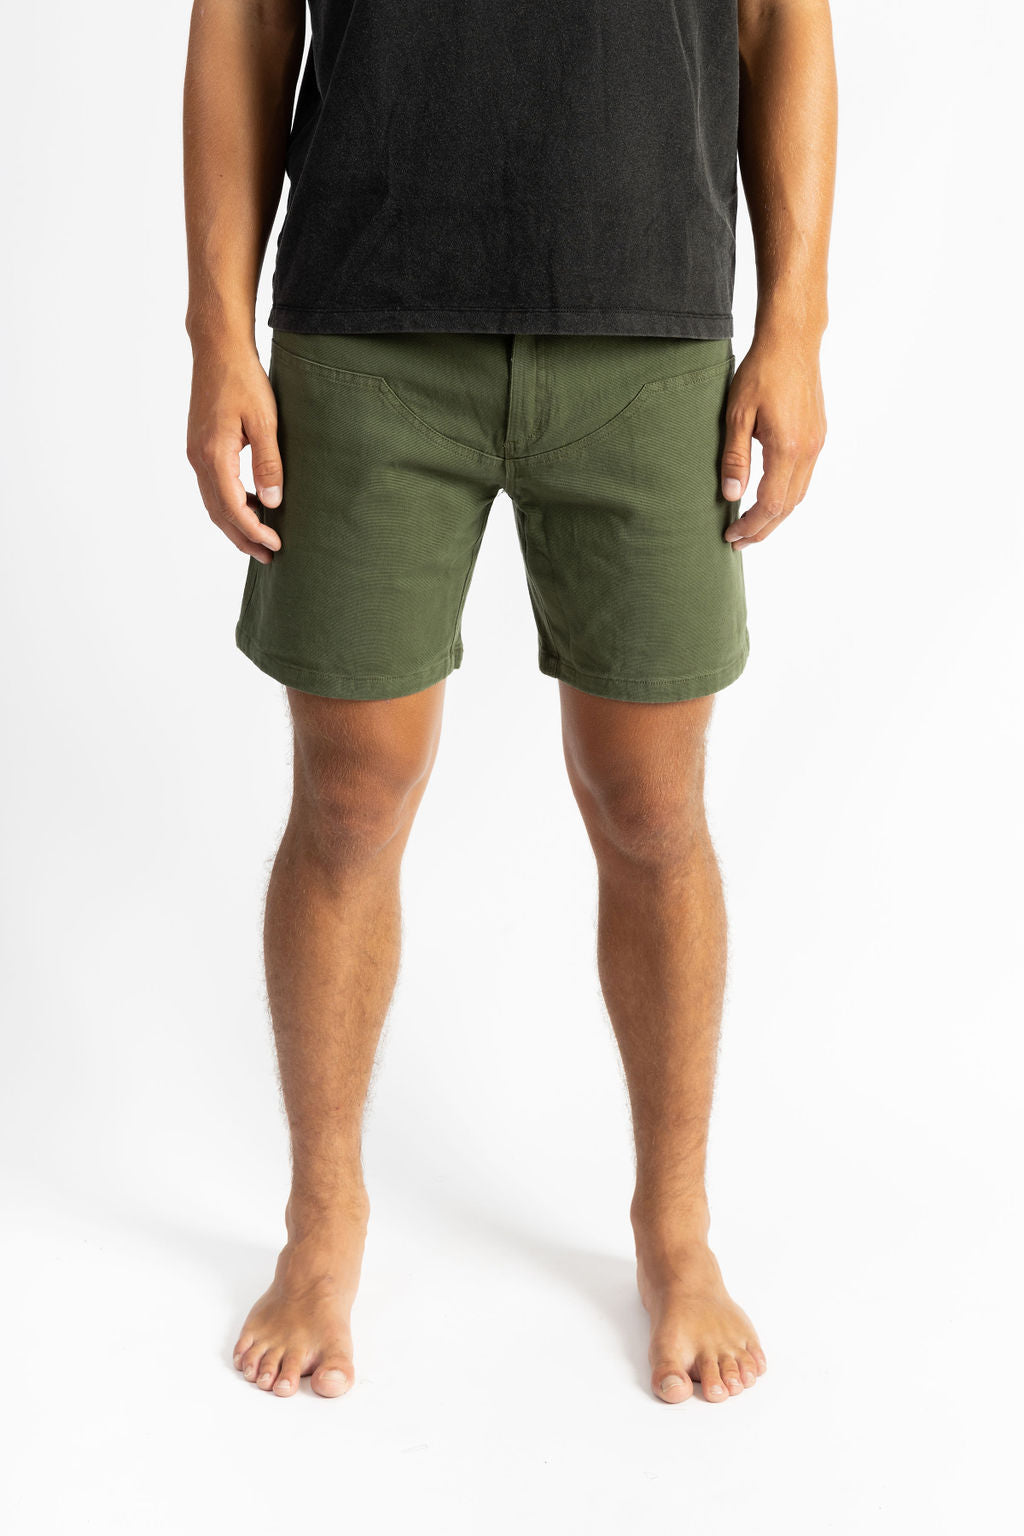 A man wearing an Olive color work shorts with a black shirt